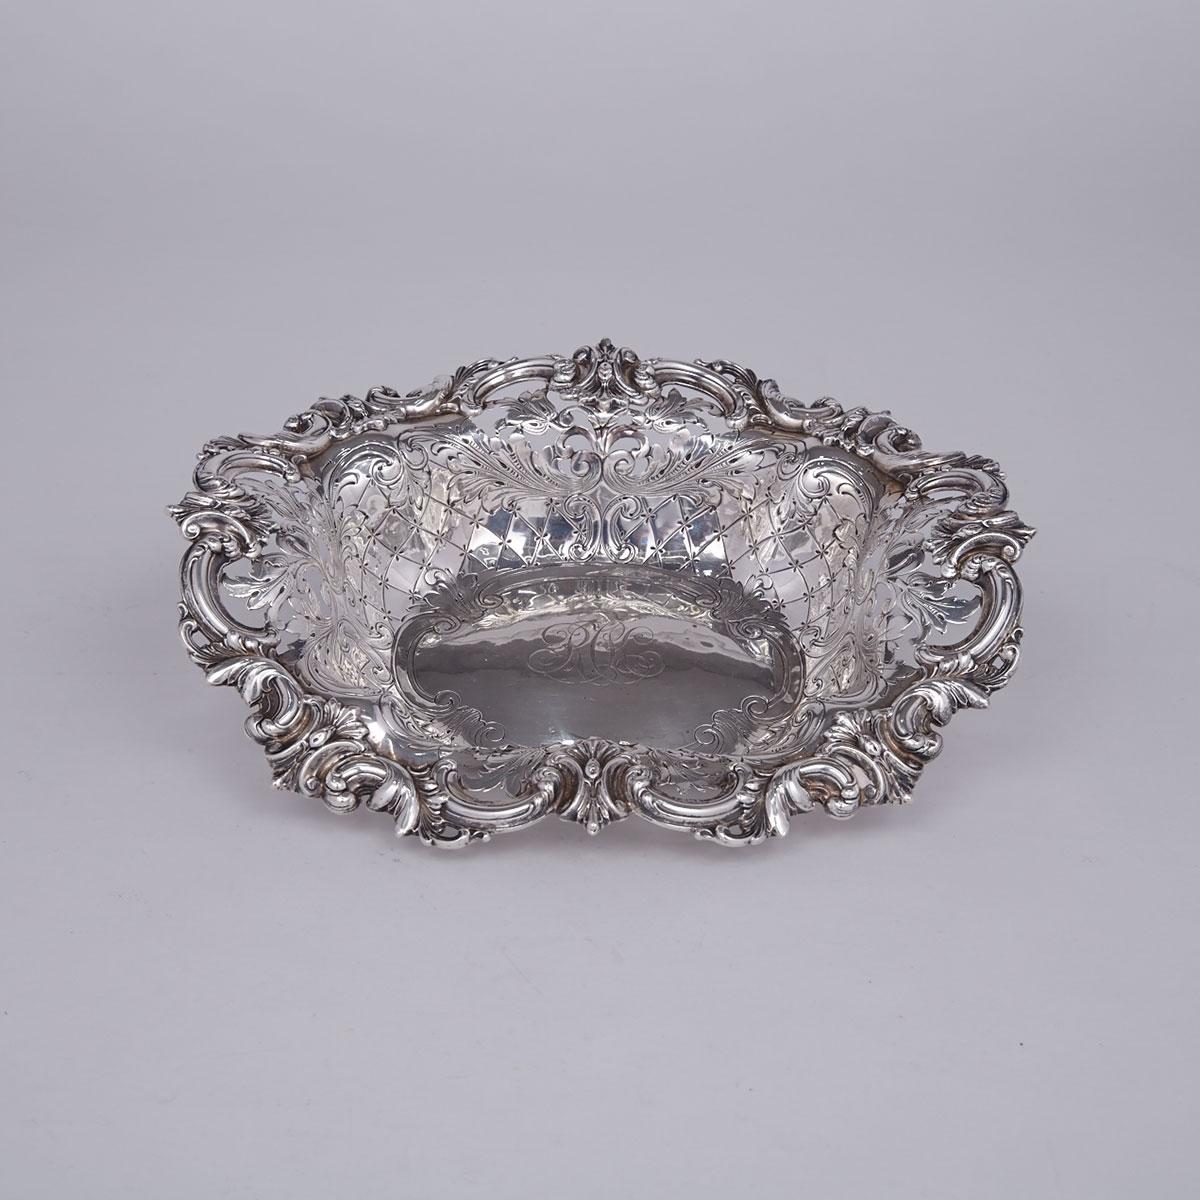 American Silver Oval Berry Bowl, Black, Starr & Frost, New York, N.Y., late 19th century